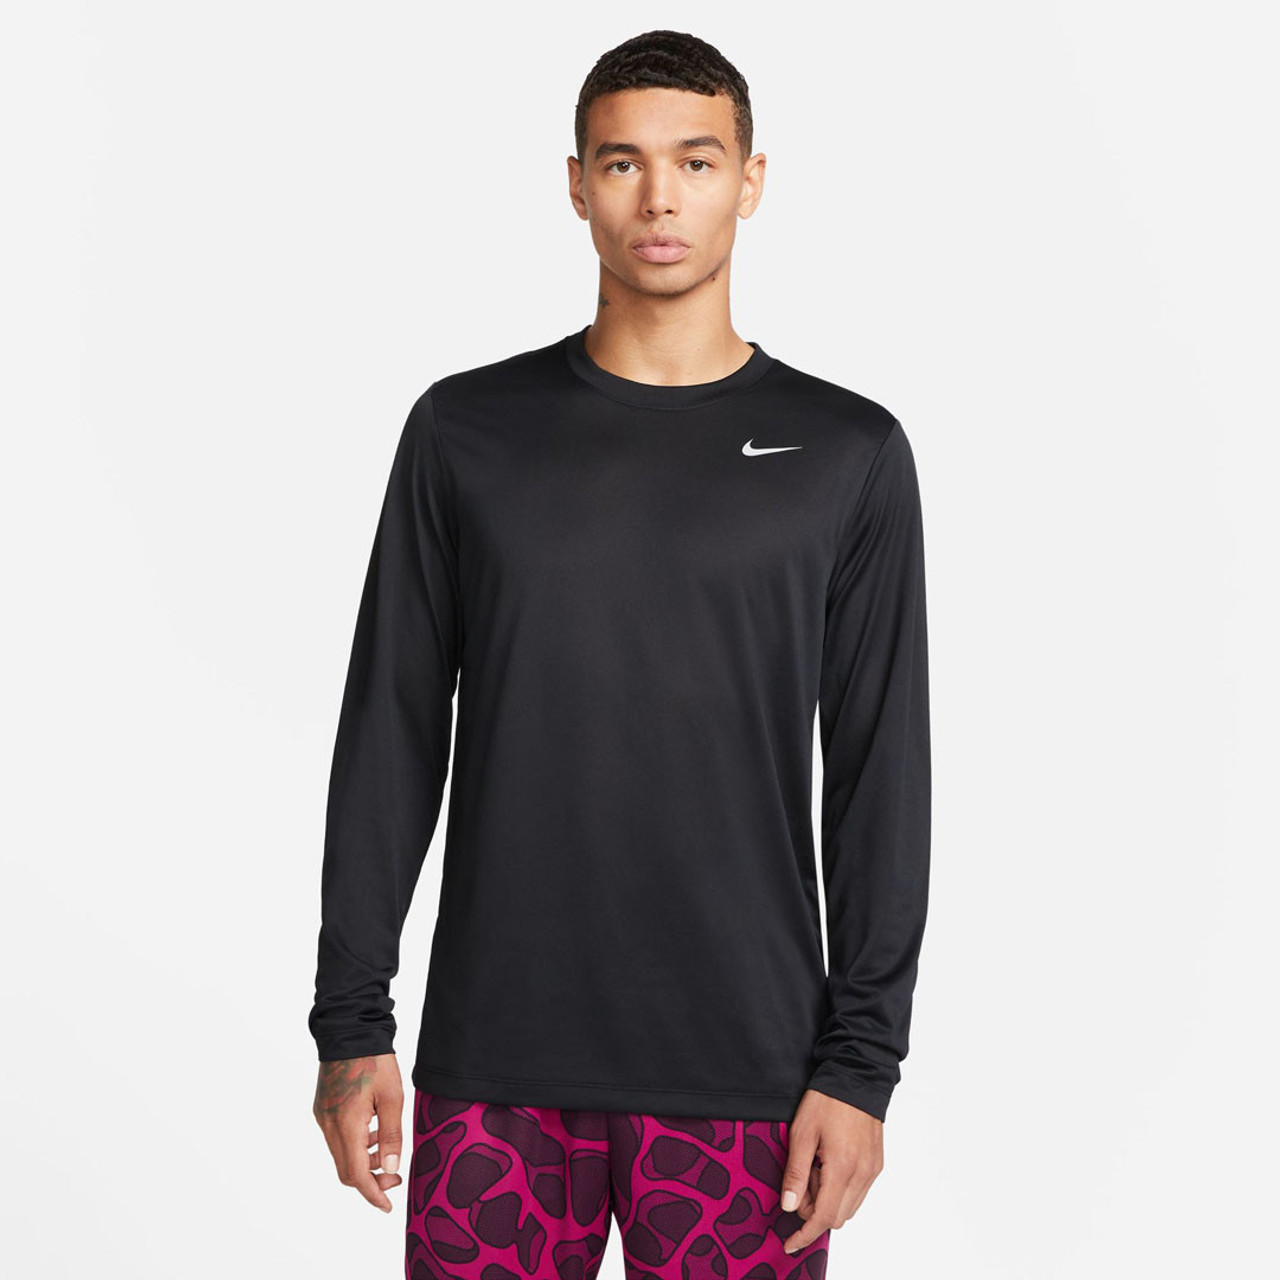 Long Sleeve Sports Tops, Gym & Running Tops